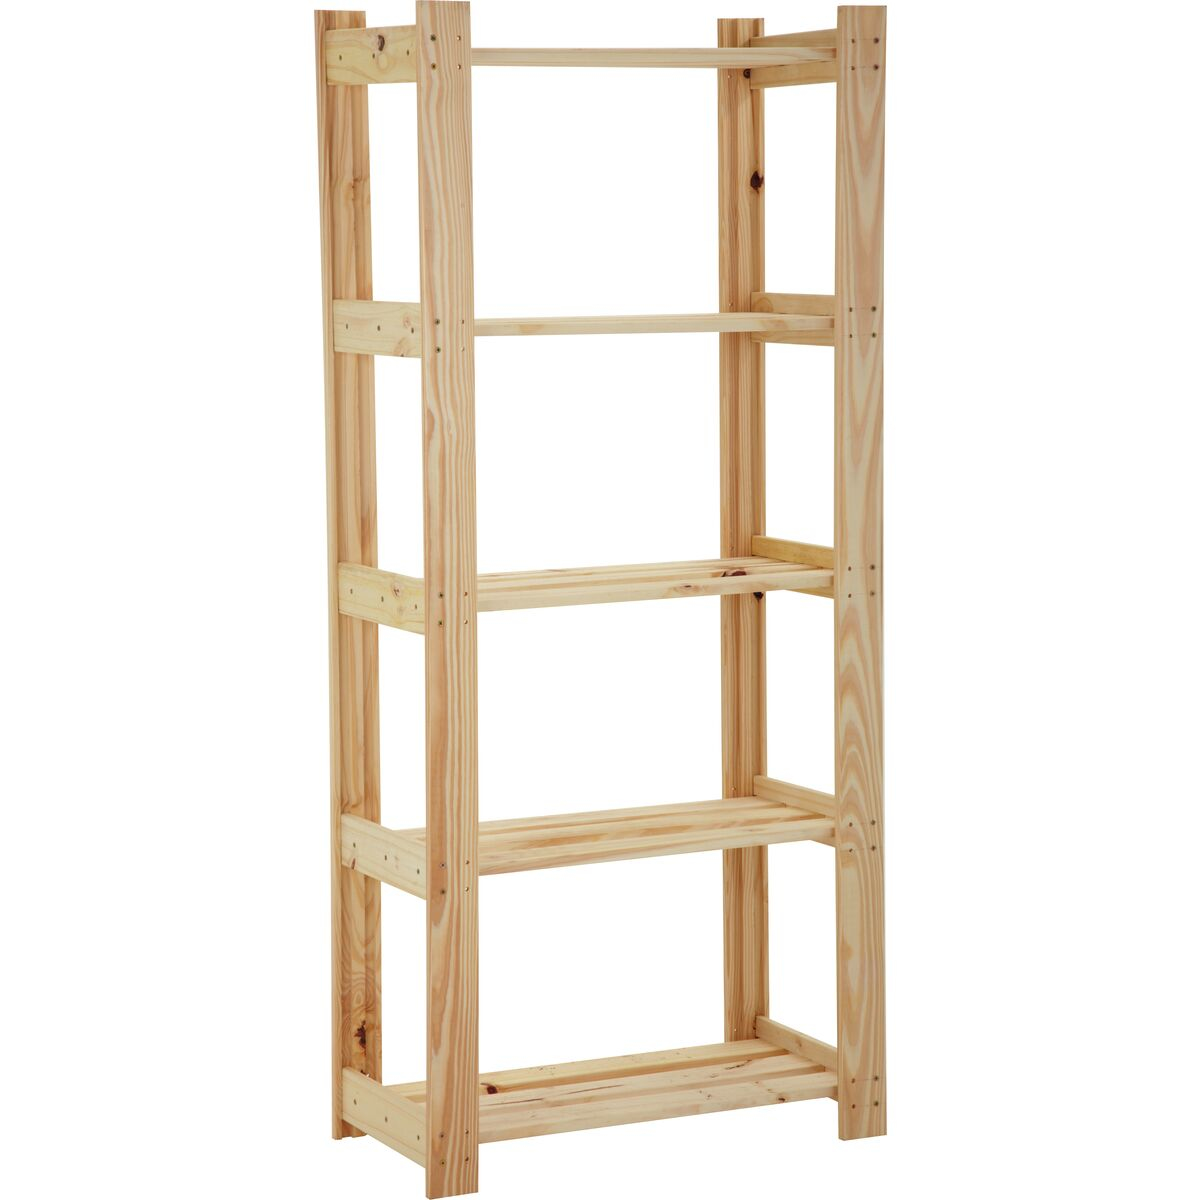 Tramontina Modulare Pine Wood Bookcase with Natural Finish and 5 Shelves, 62.2x30.2 cm